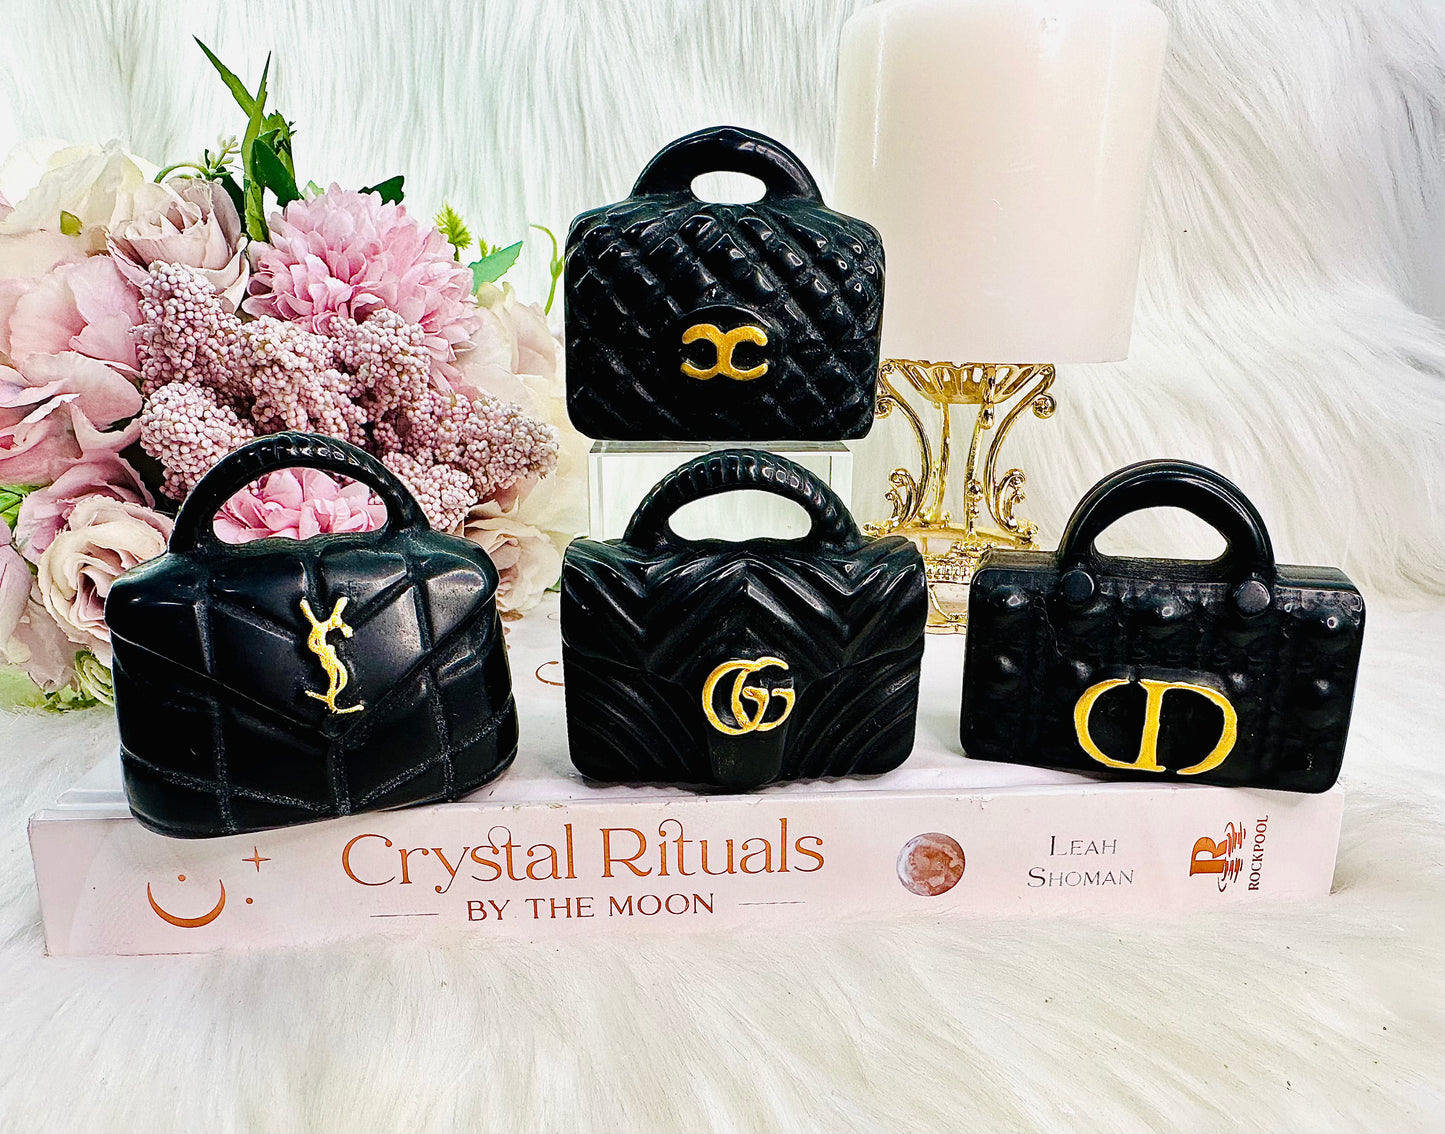 Incredible Deal!!! Set of 4 Black Obsidian Handbag Carvings ~ Gucci, Yves Saint Laurent, Christian Dior, Chanel ~ Individual Price $49 each ~ Package Price $149 (Save $47) xx